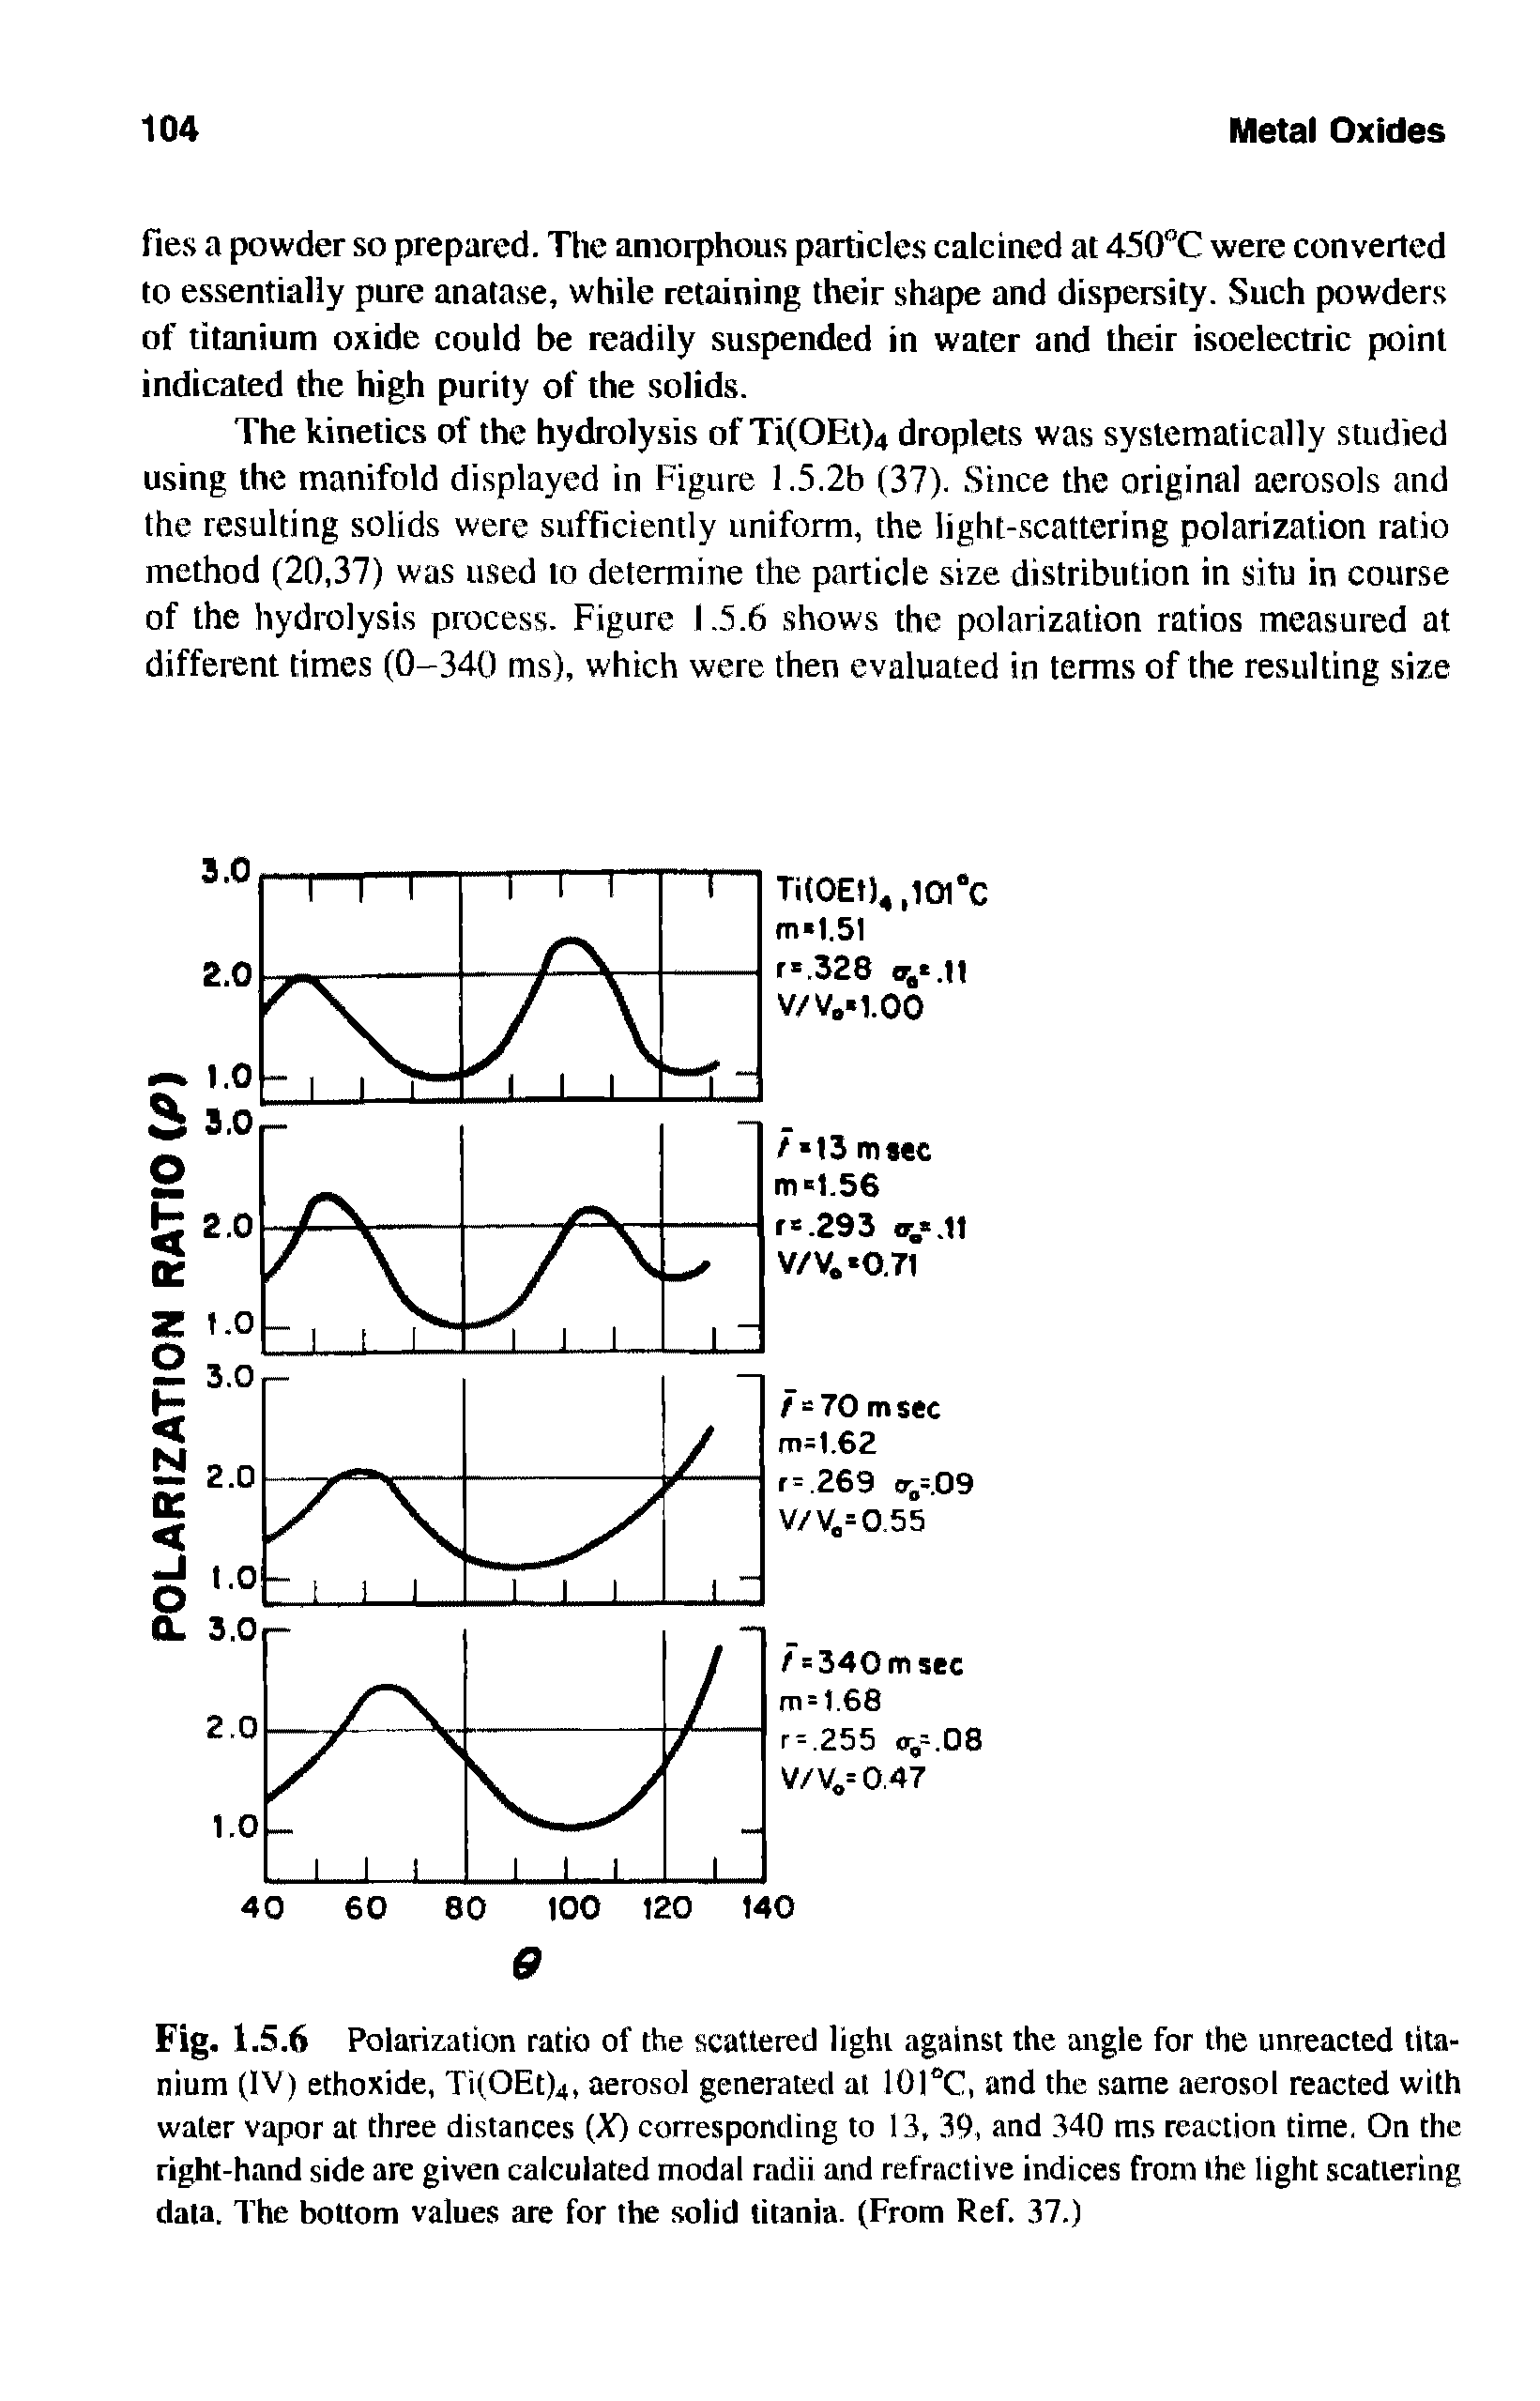 Fig. 1.5.6 Polarization ratio of the scattered lighi against the angle for the unreacted titanium (IV) ethoxide, Ti(OEt)4, aerosol generated at 101°C, and the same aerosol reacted with water vapor at three distances (X) corresponding to 13, 39, and 340 ms reaction time. On the right-hand side are given calculated modal radii and refractive indices from the light scattering data. The bottom values are for the solid titania. (From Ref. 37.)...